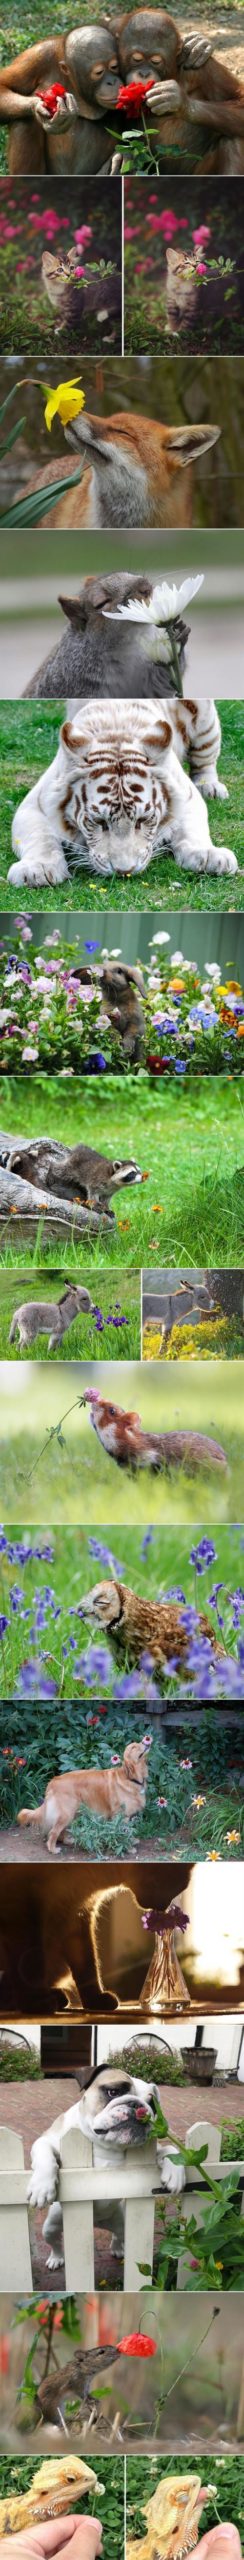 Animals+smelling+flowers